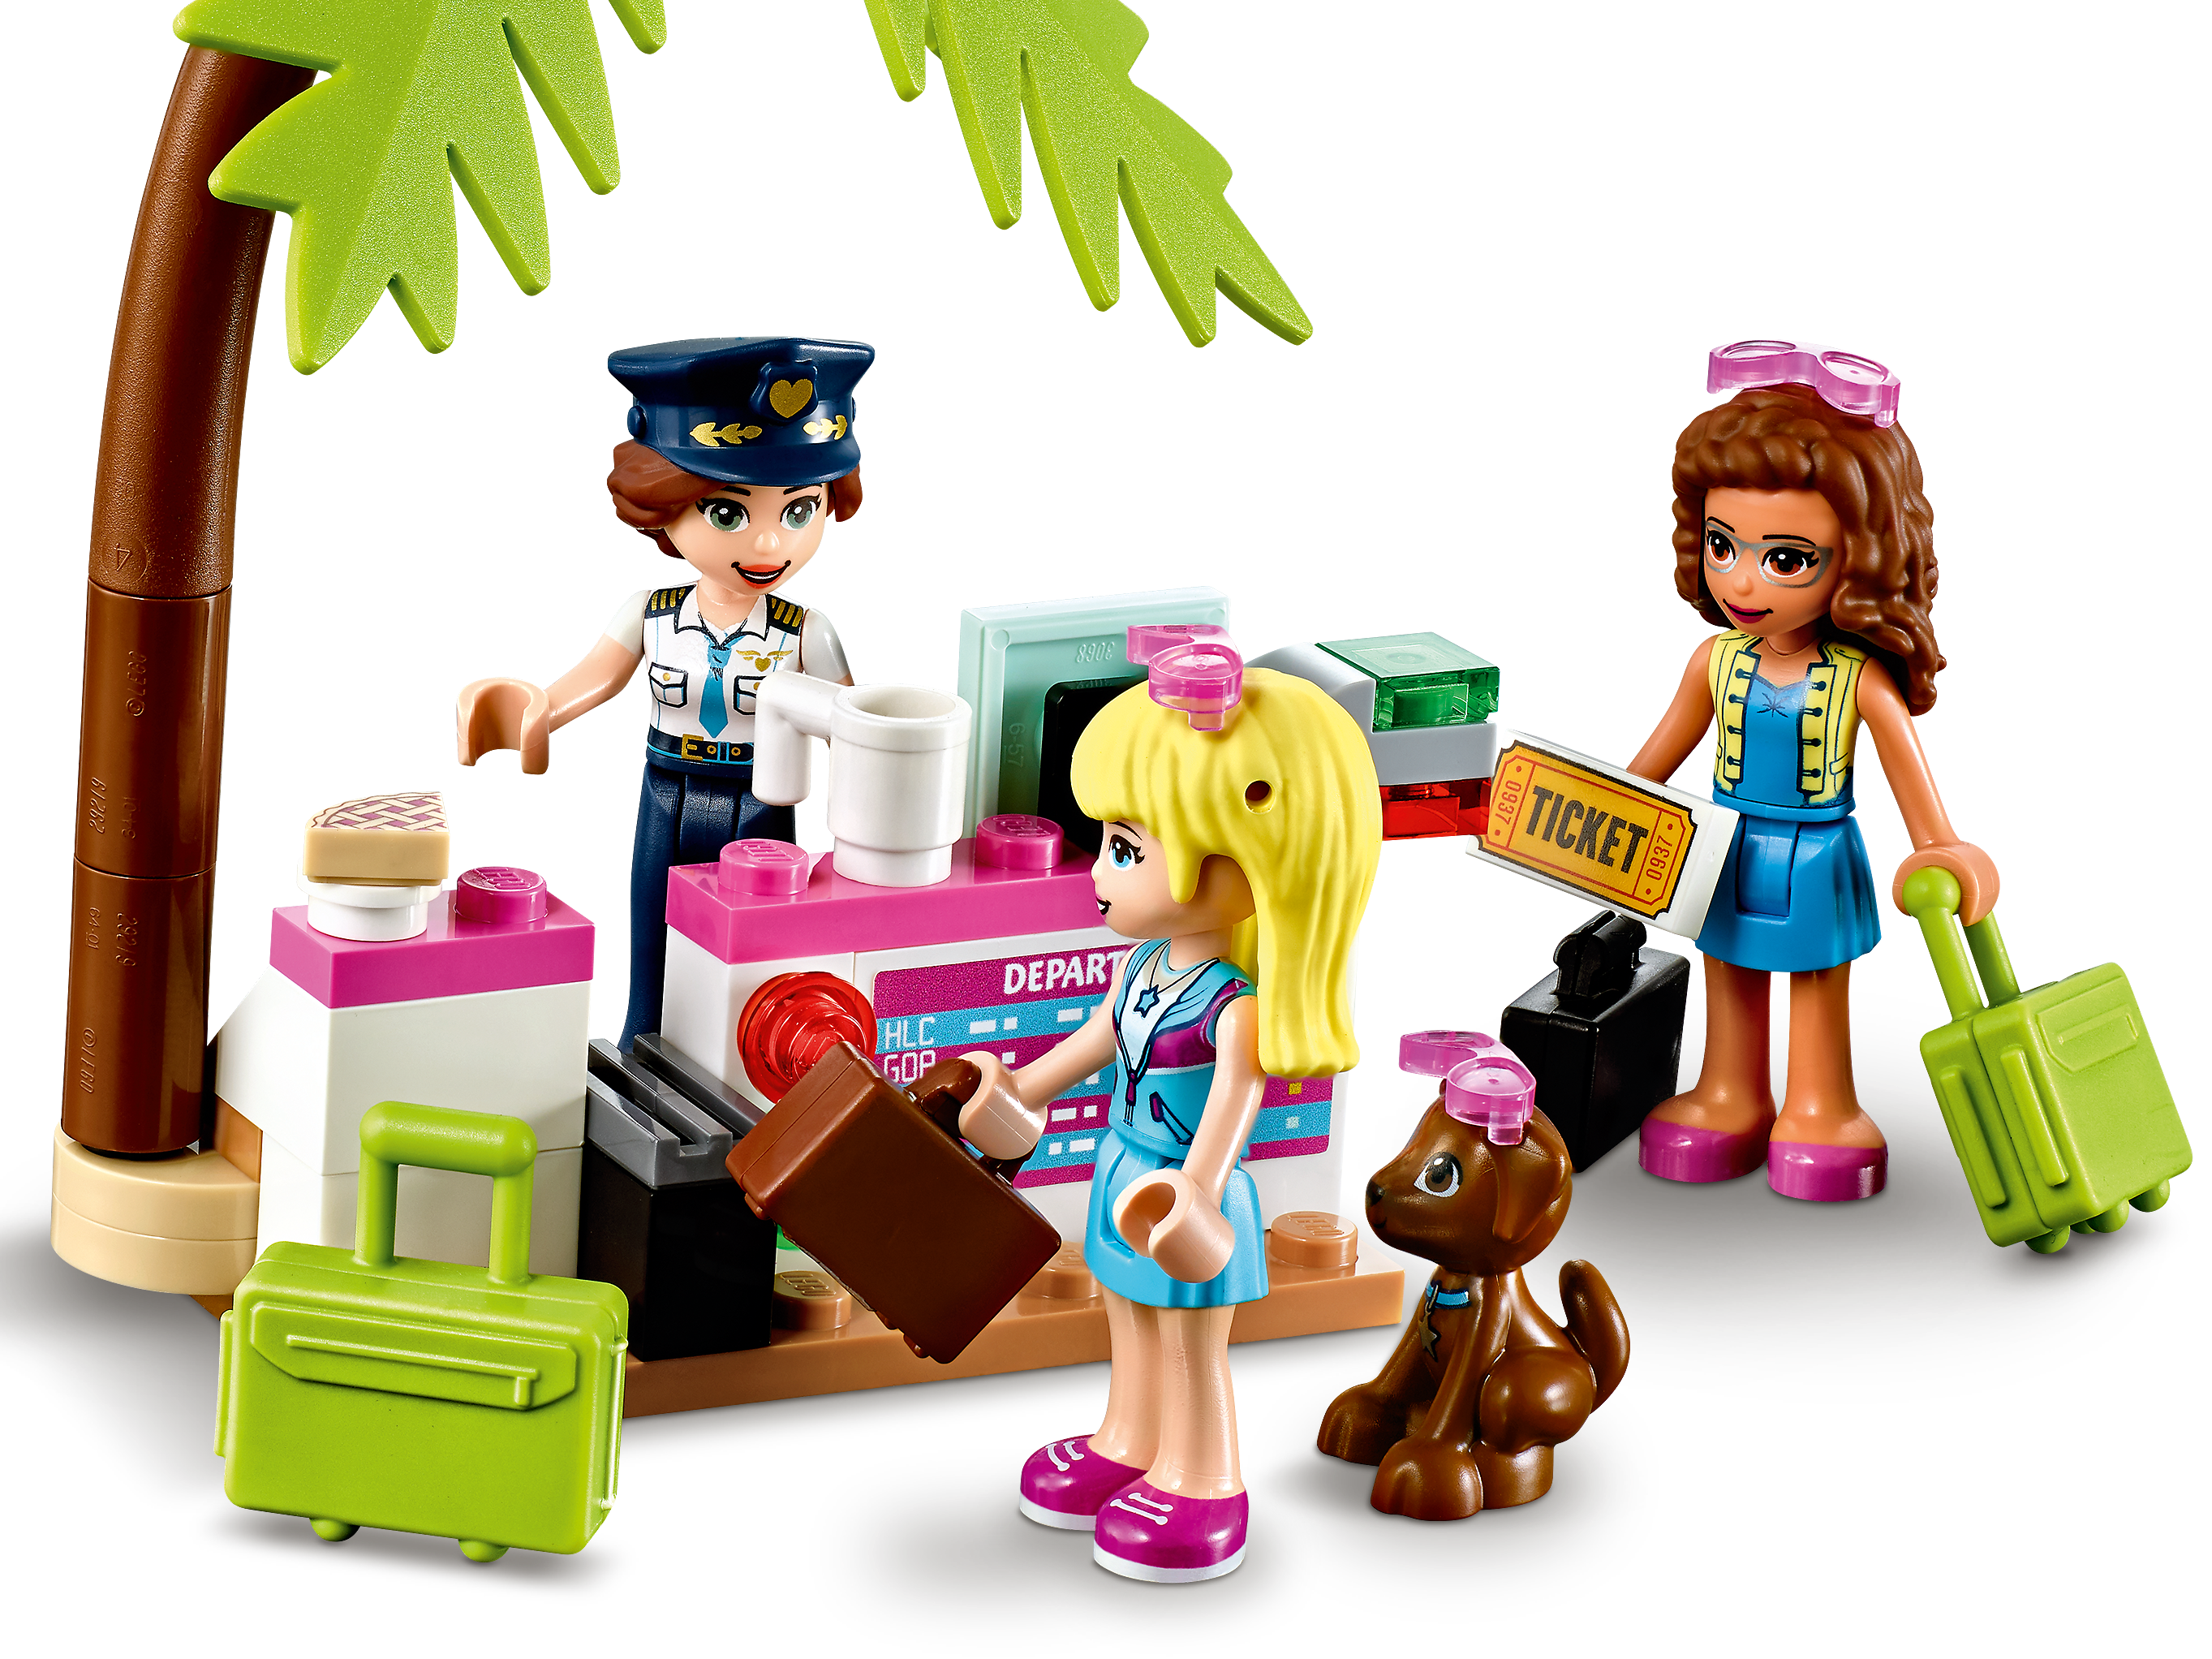 for sale online 41429 LEGO Heartlake City Airplane LEGO Friends